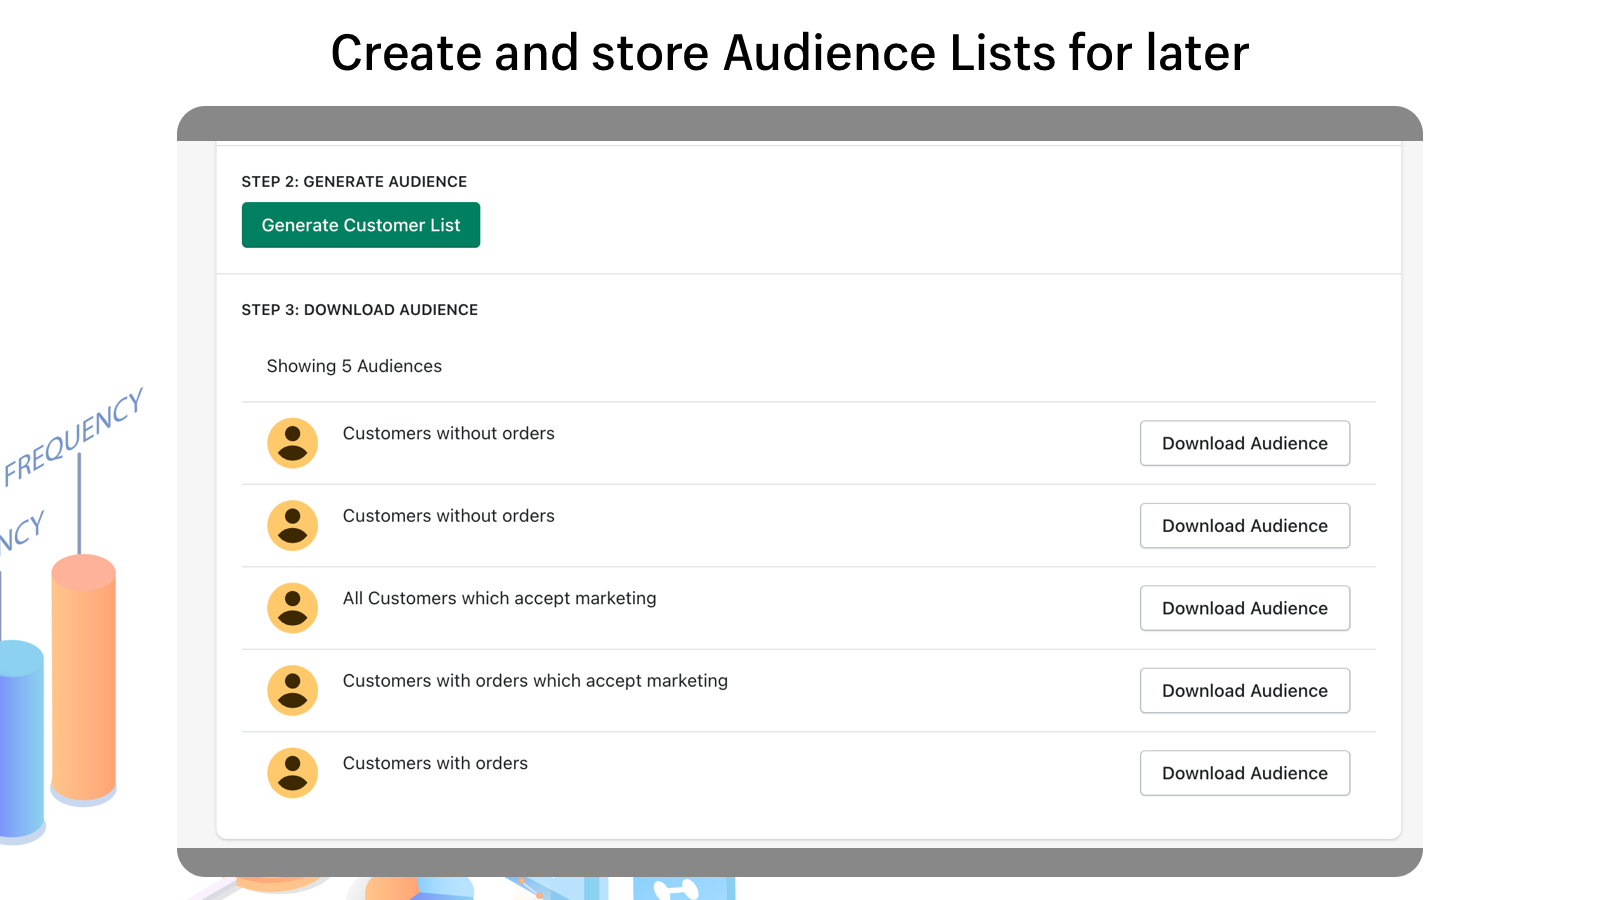 Create and Store Audience Lists for Later